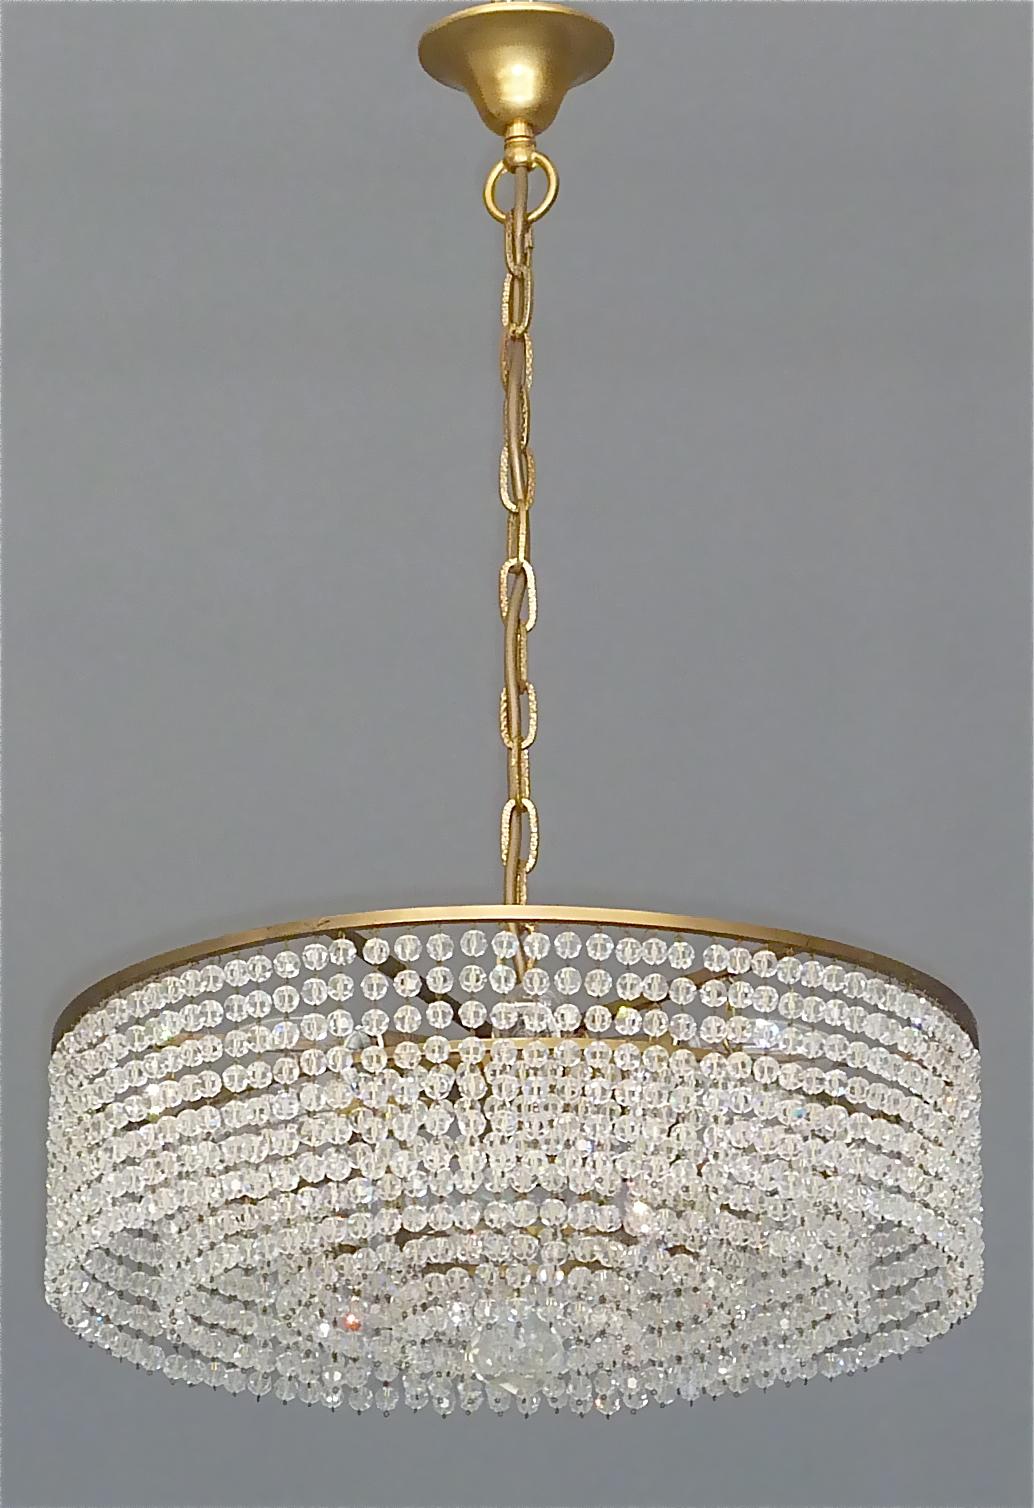 Mid-Century Modern Lobmeyr Crystal Glass String Chandelier Patinated Brass Austria 1950s, No.2 of 2 For Sale